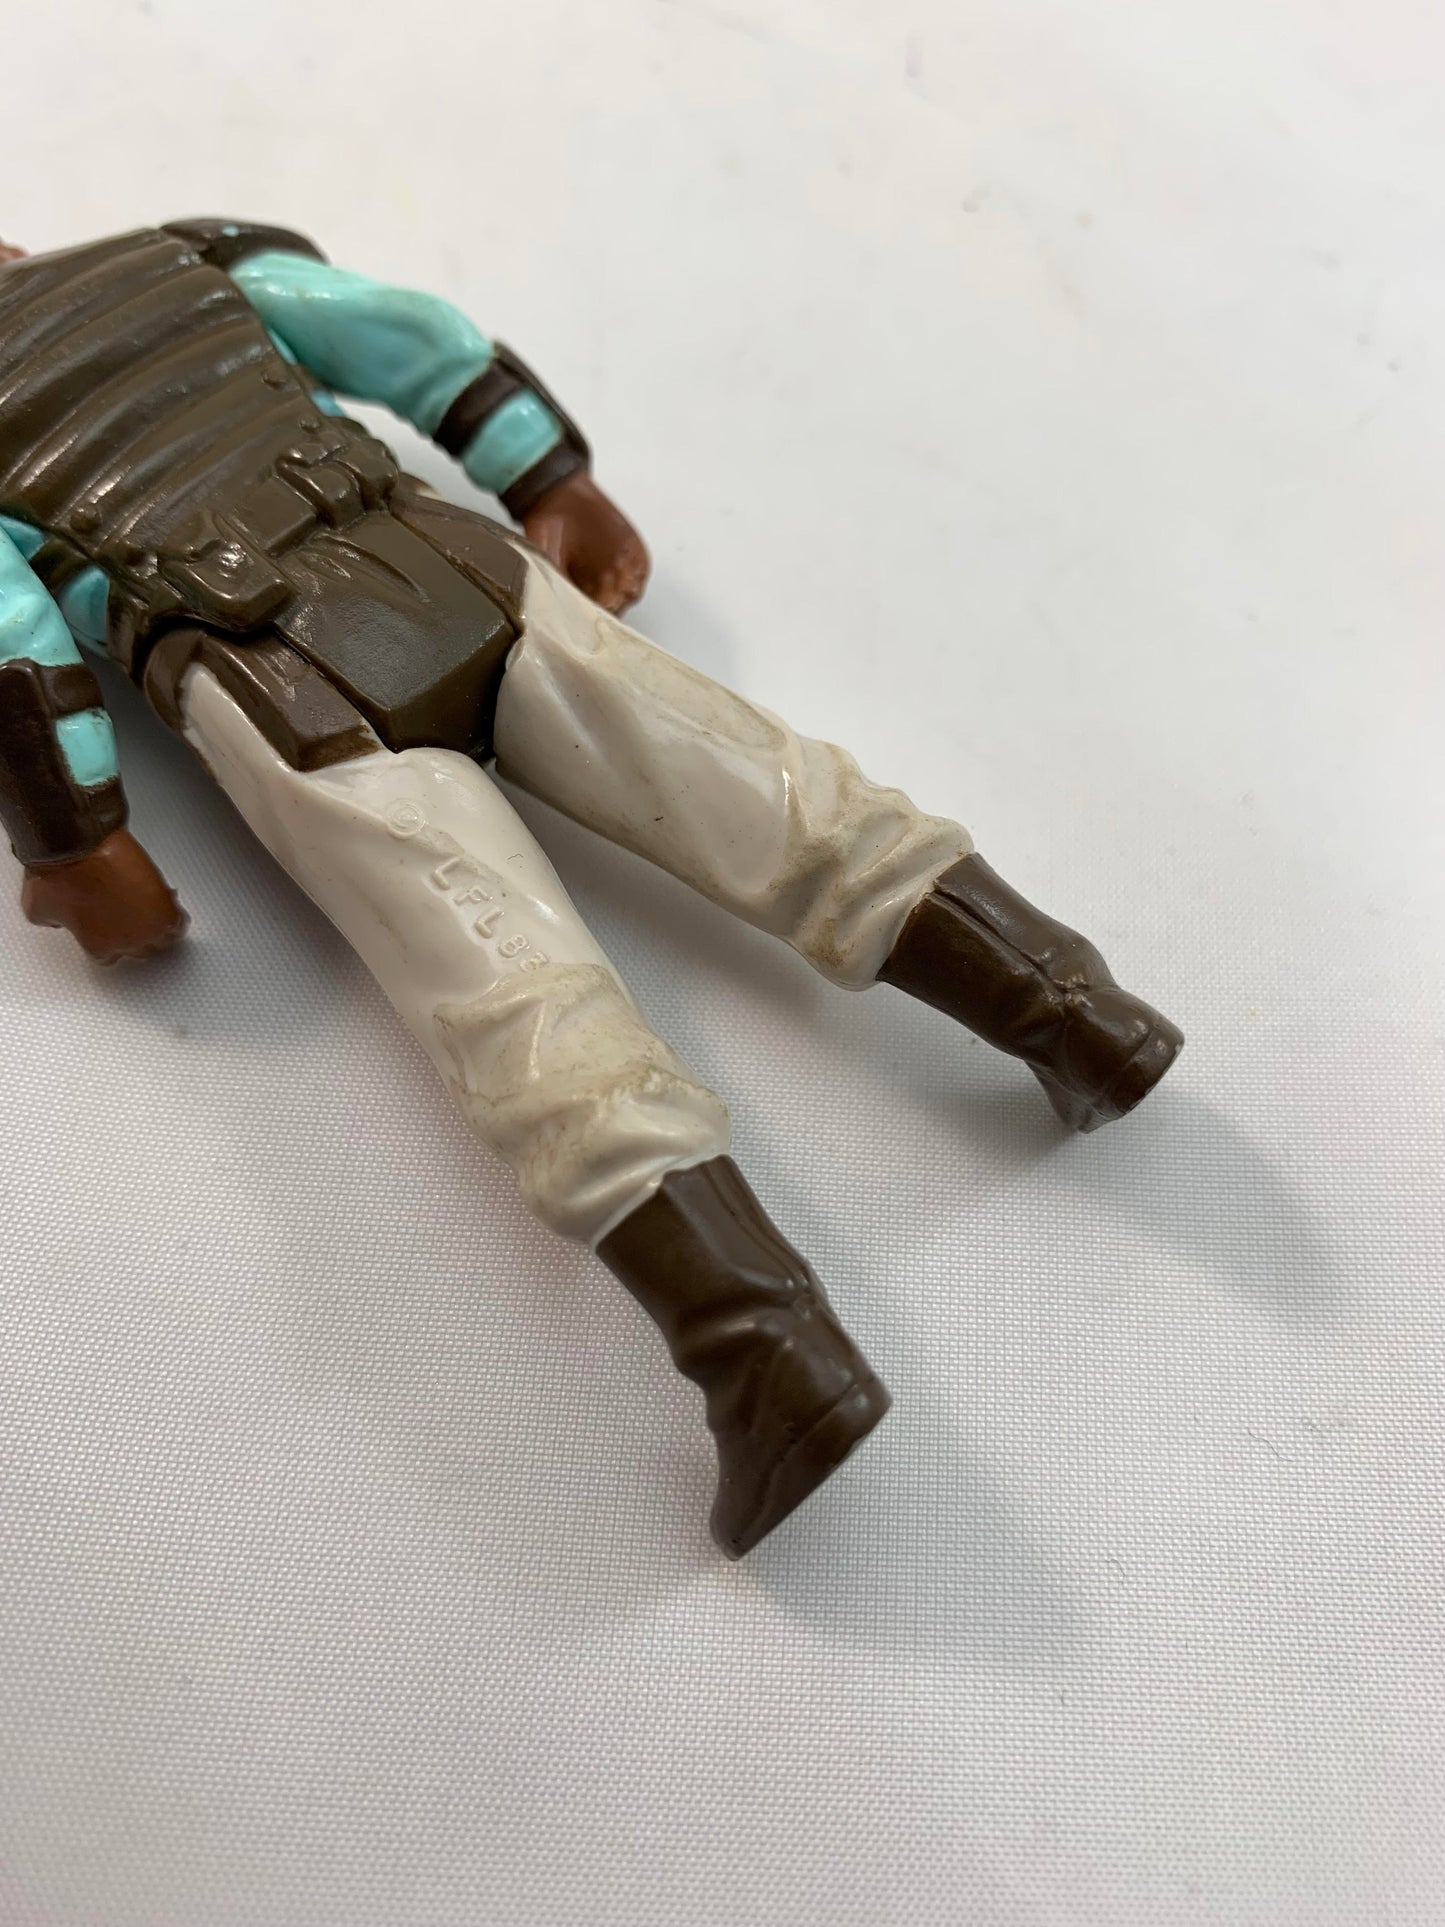 Vintage Star Wars - Weequay - Action Figure - NO COO (SMOOTH) LFL 1983 - Loose